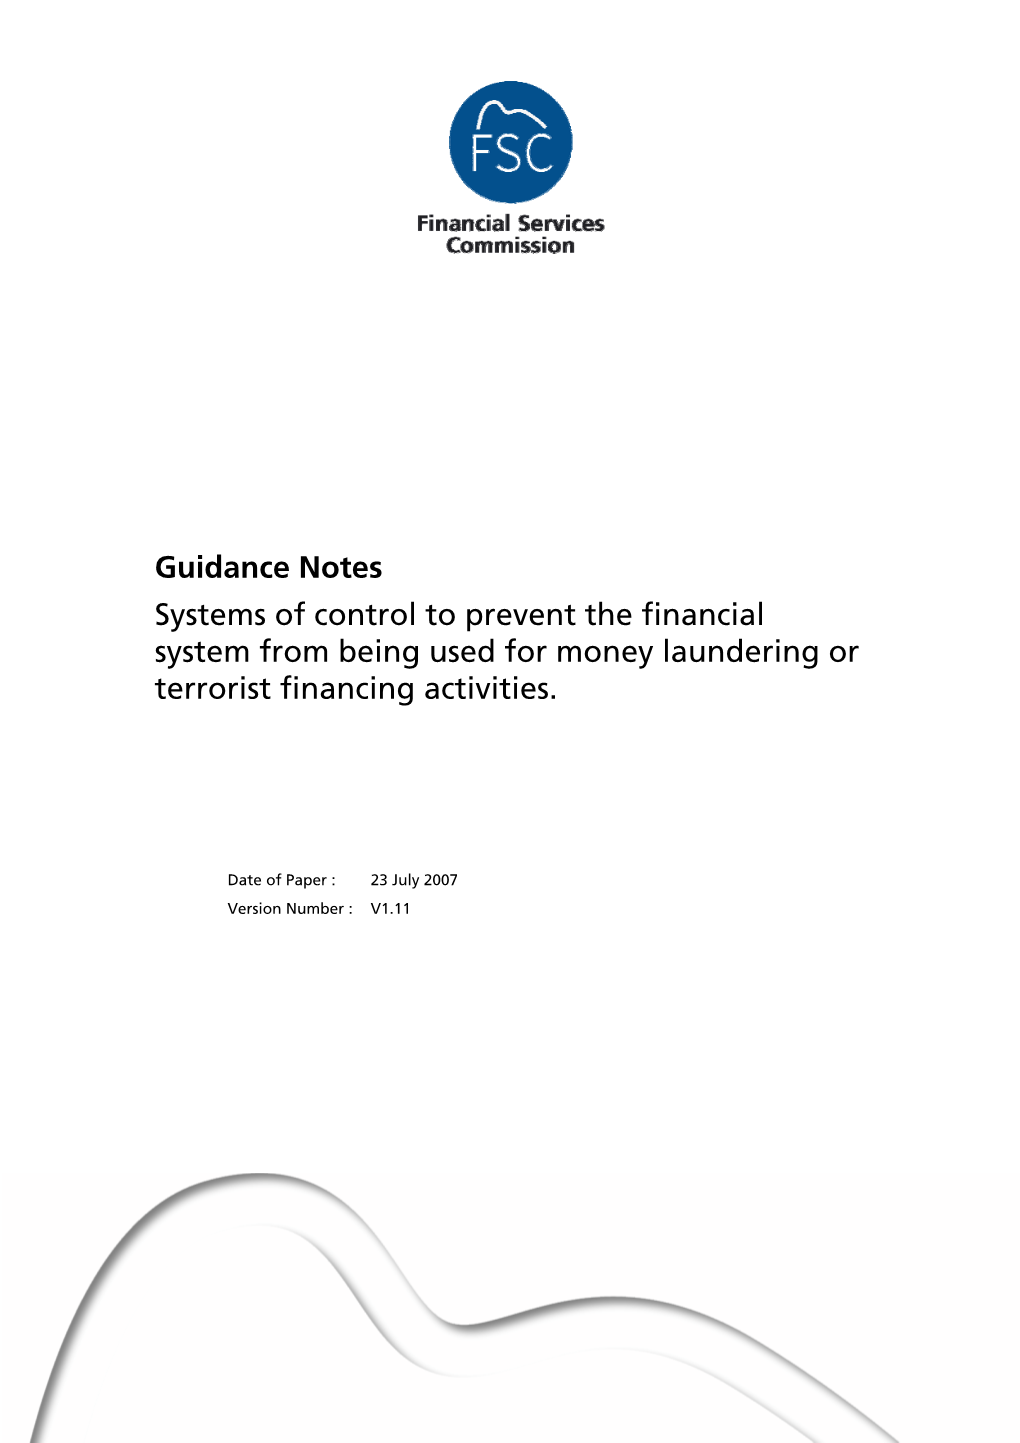 Guidance Notes Systems of Control to Prevent the Financial System from Being Used for Money Laundering Or Terrorist Financing Activities